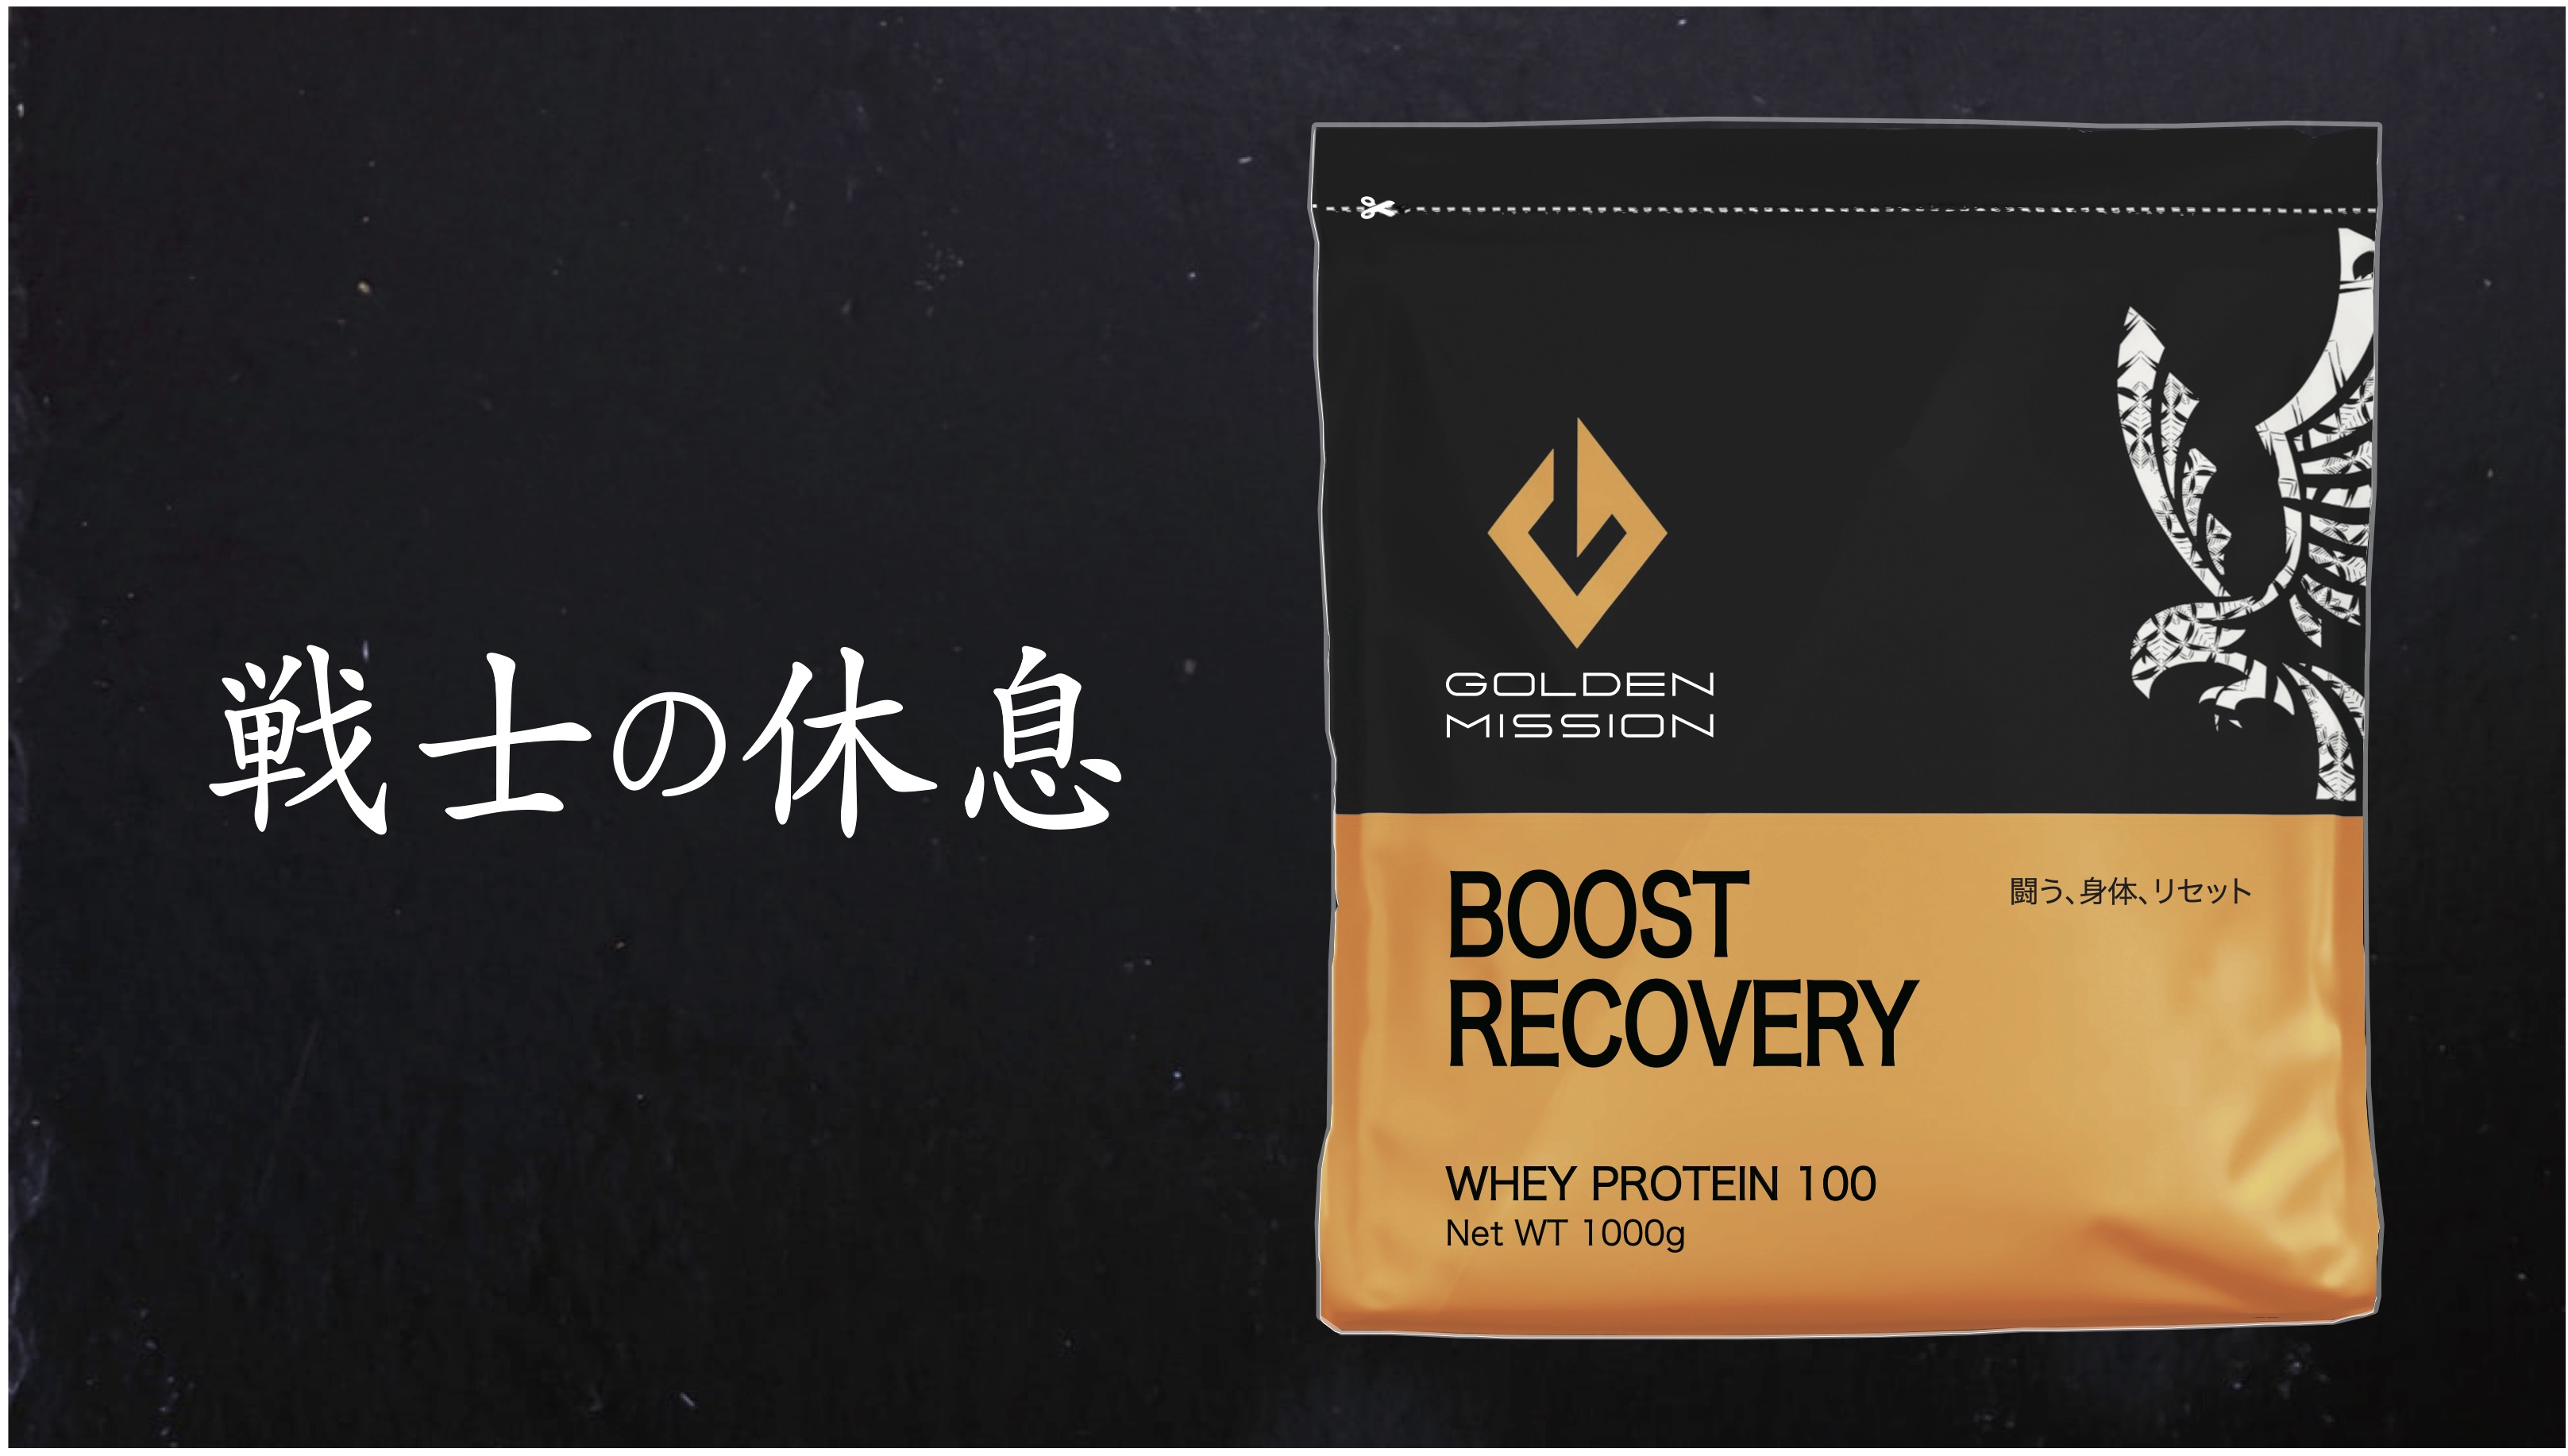 GOLDEN MISSION - BOOST RECOVERY